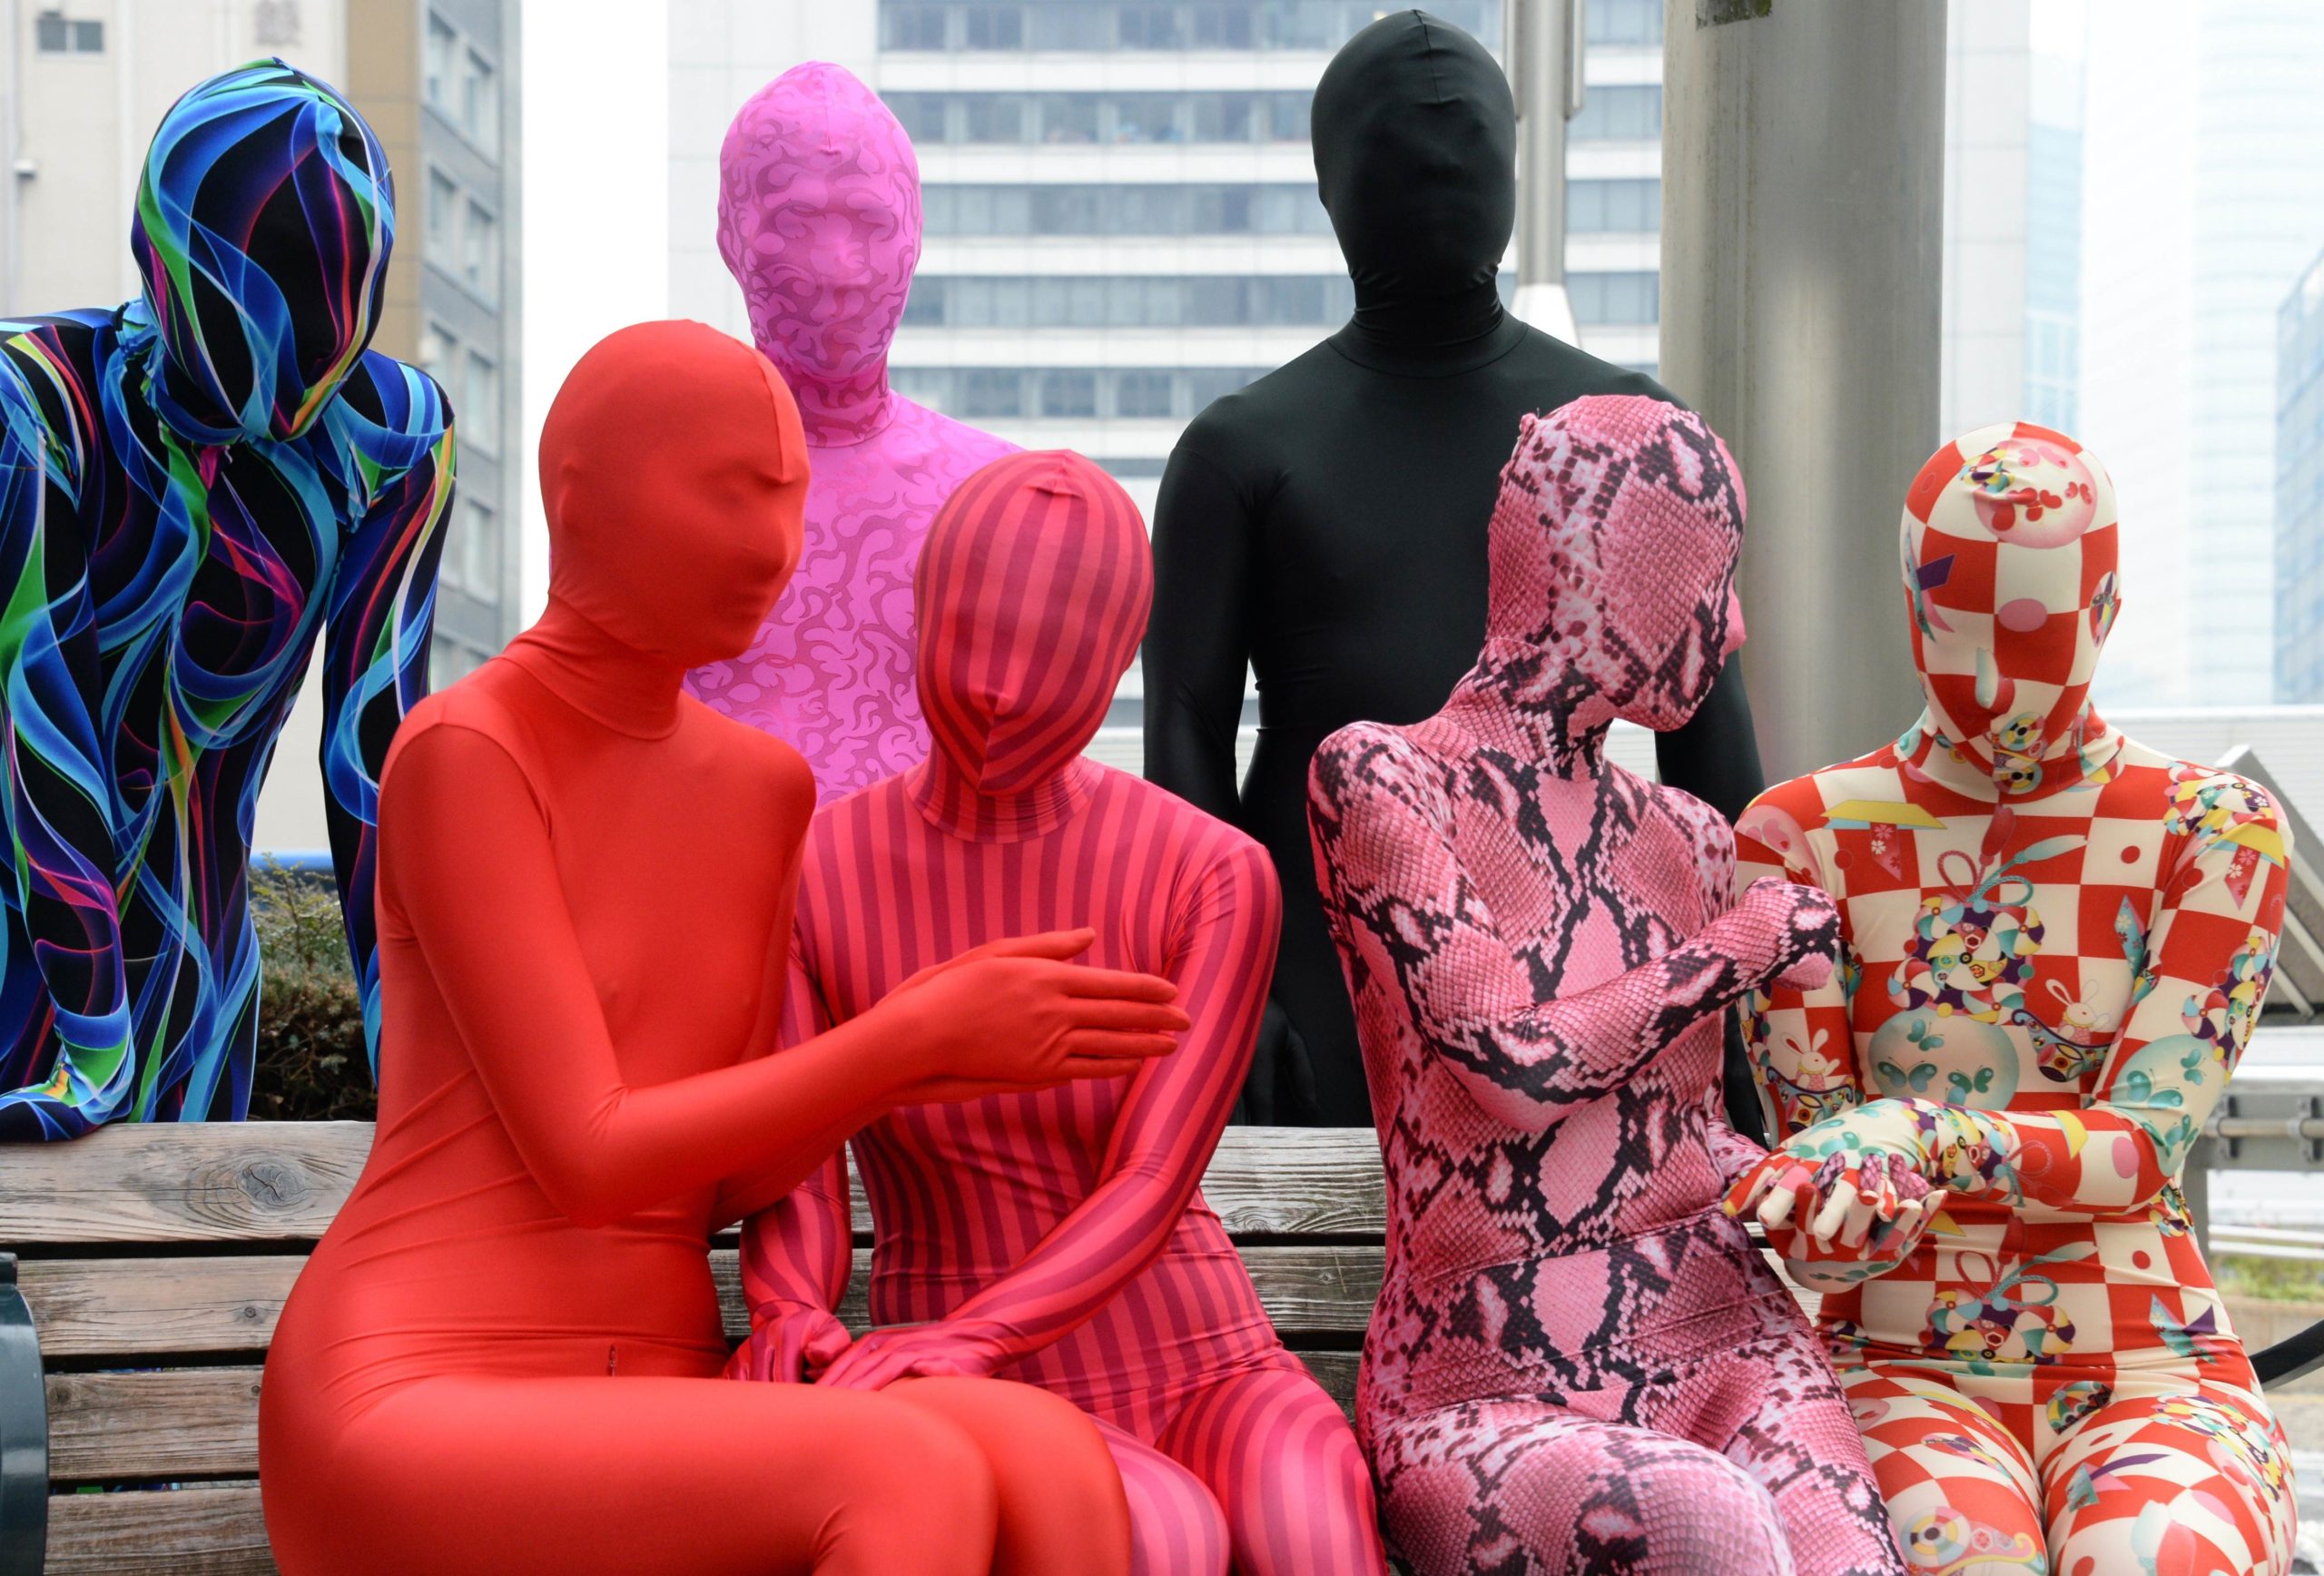 Zentai: Japanese dress in full-body suits to escape pressures of modern  life - ABC News